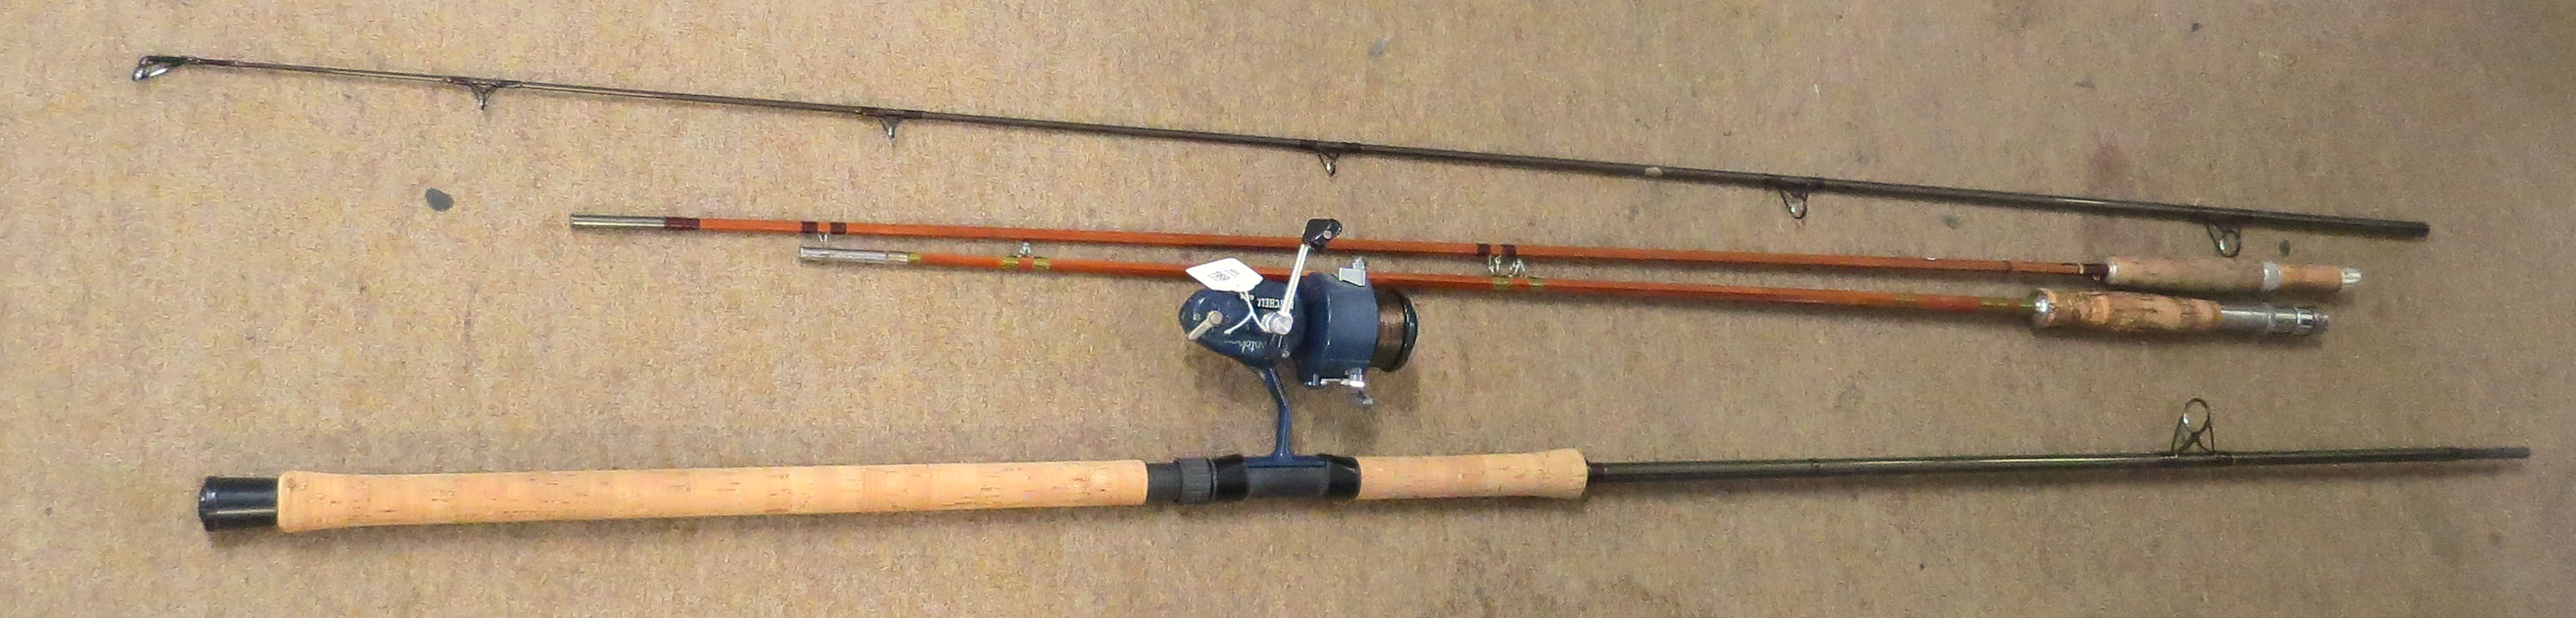 Two vintage fishing rods with a Mitchell 440A match reel